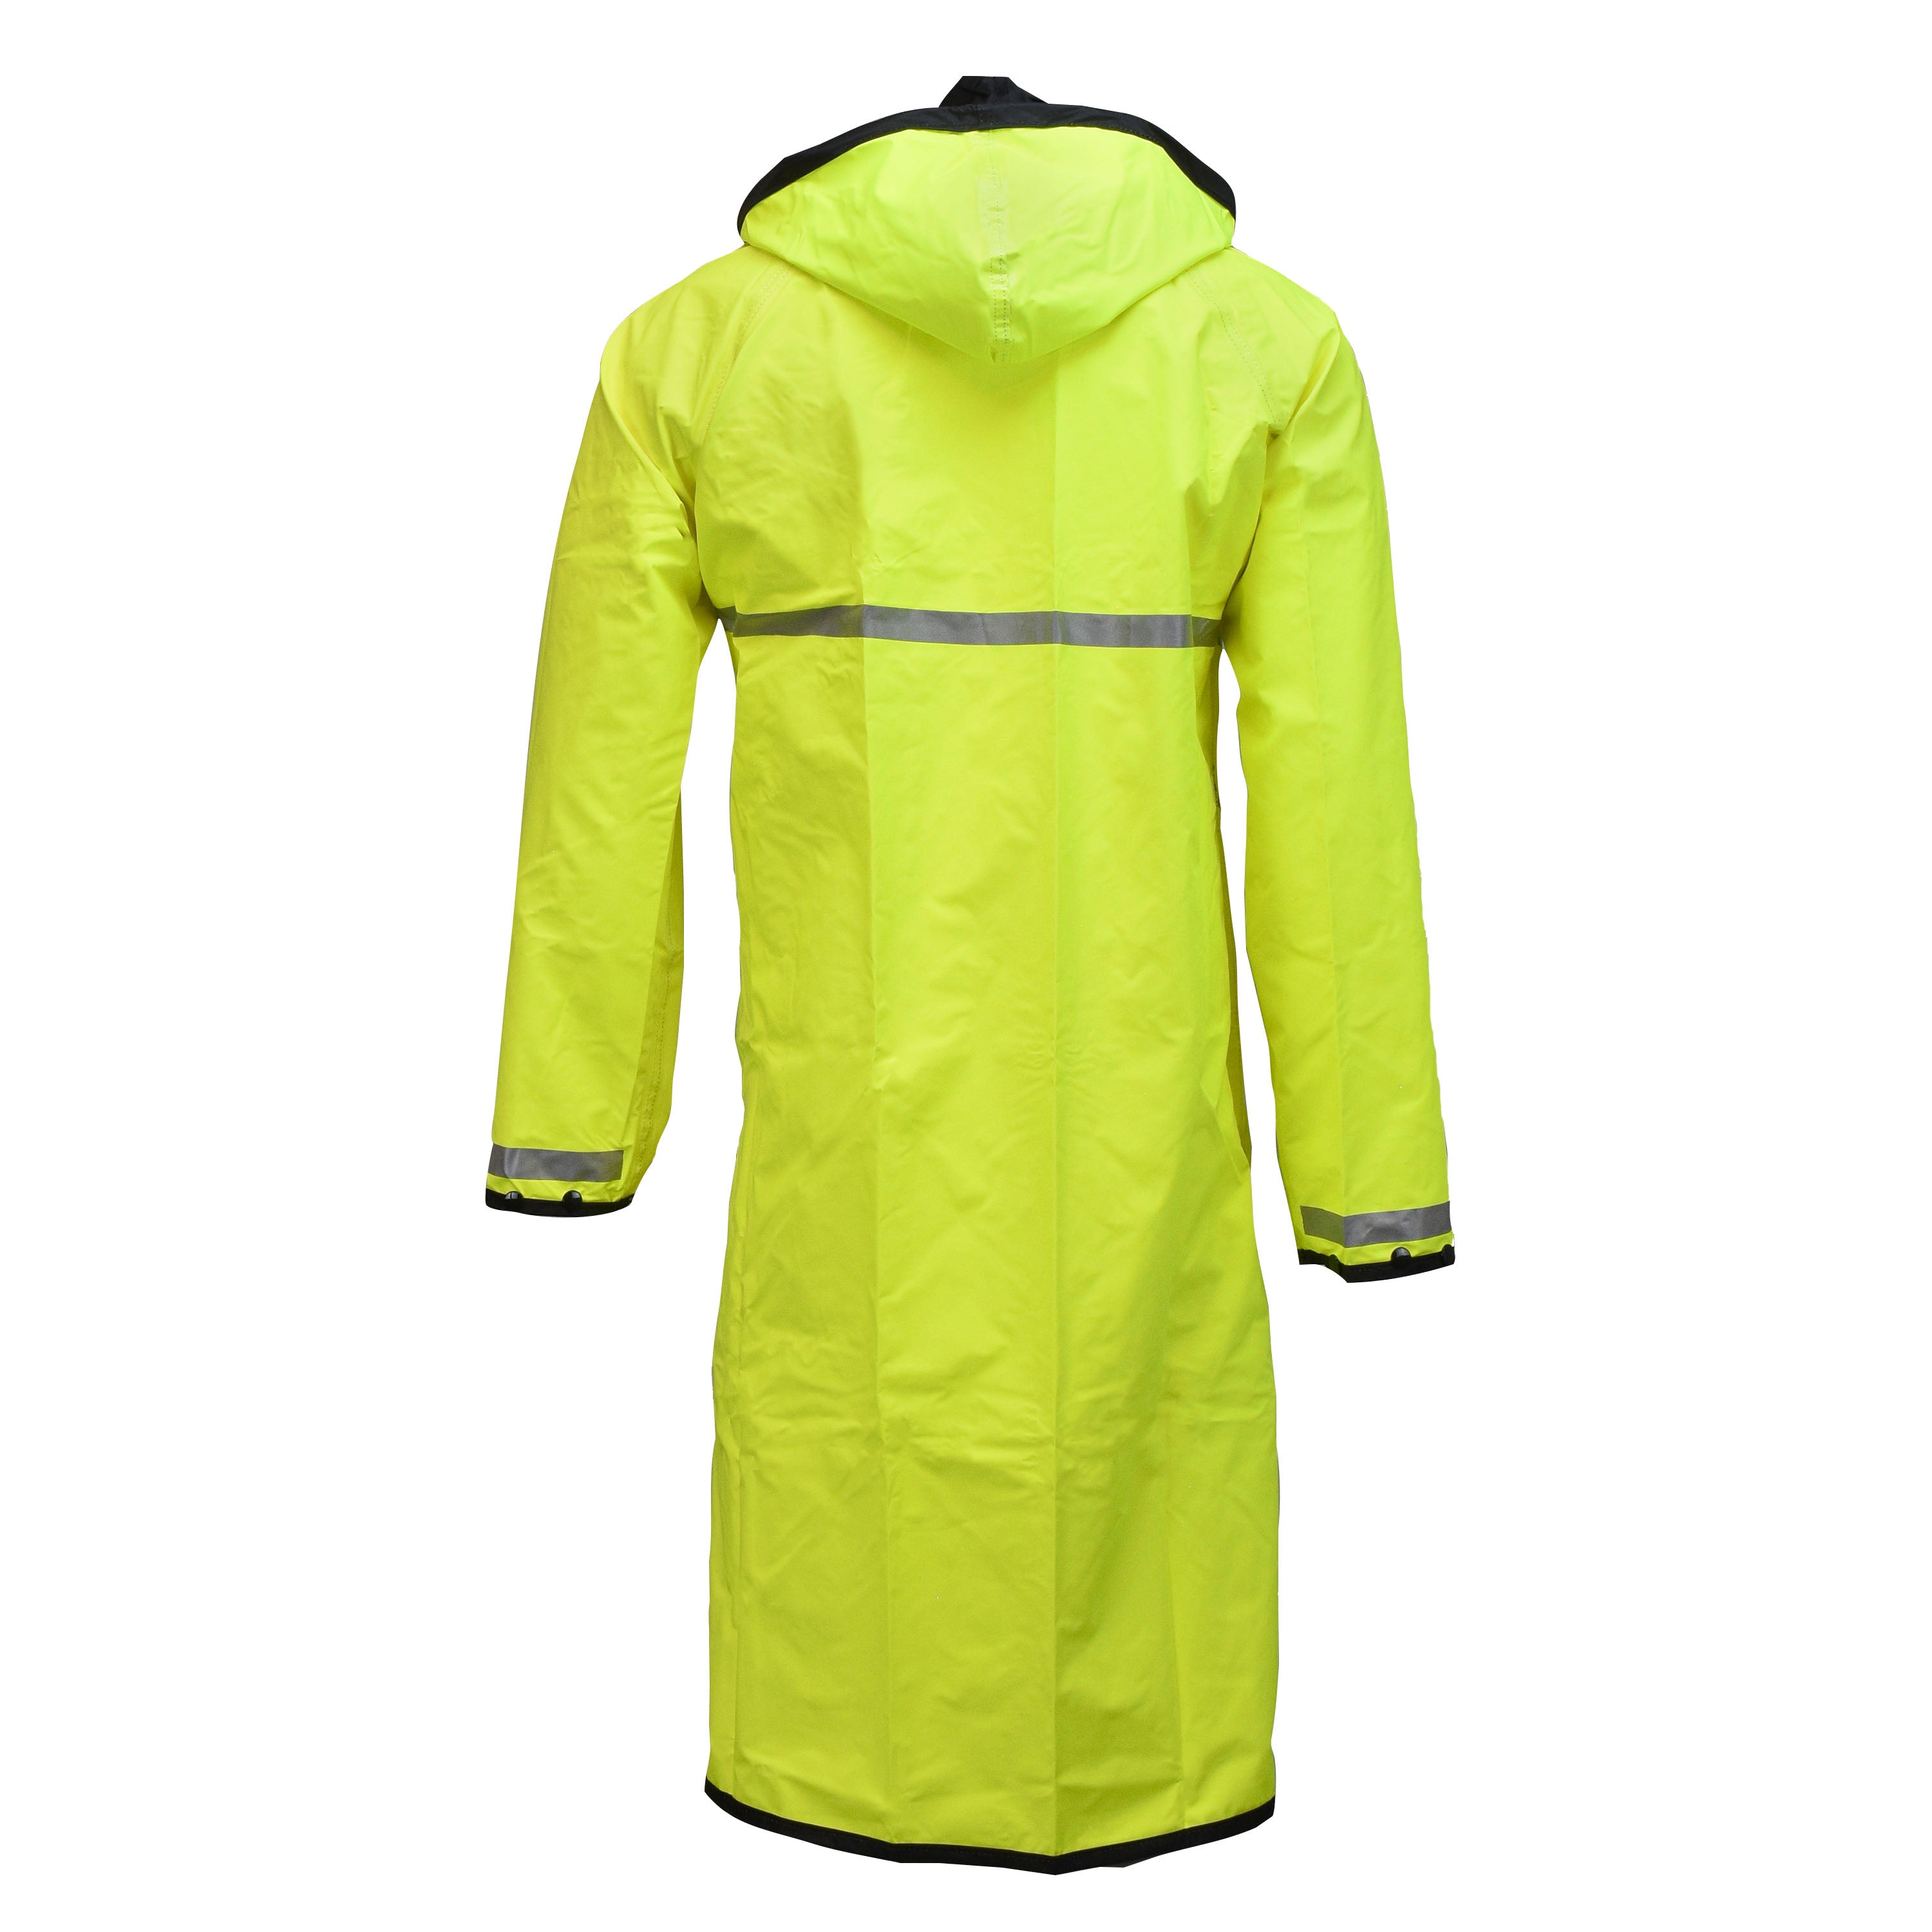 Radians 475RJH3M Duty Reversible Jacket with 3M Reflective Taping - Hi-Vis Lime/Black